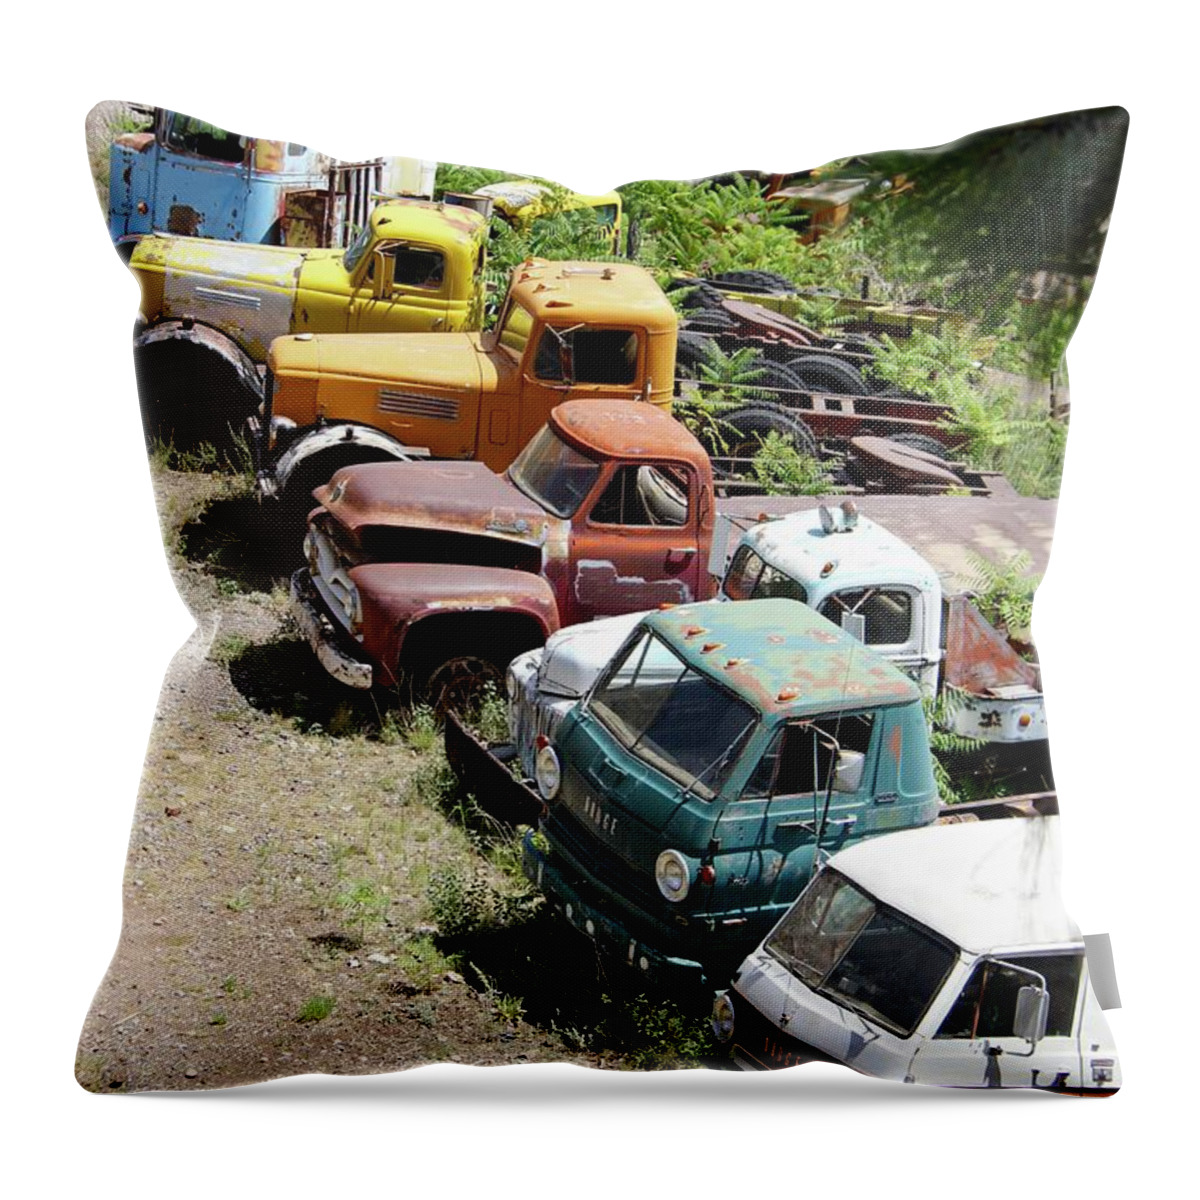 Cars Throw Pillow featuring the photograph Junkyard Rainbow by Suzanne Oesterling